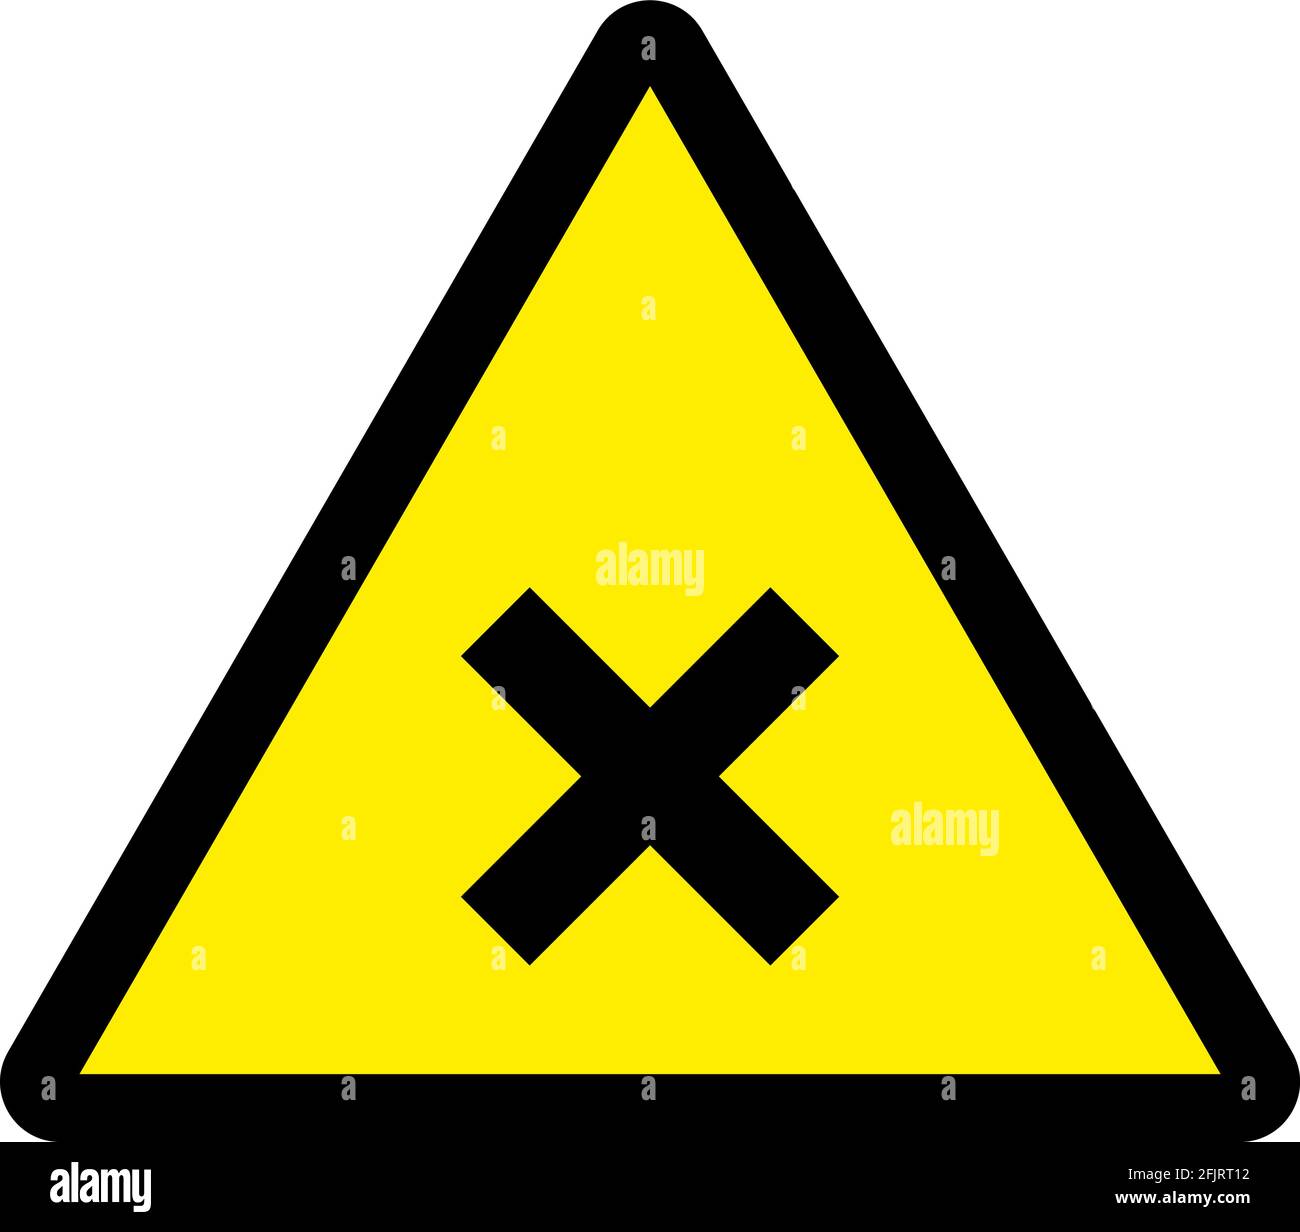 Harmful warning sign. Black on yellow background. Chemical Safety signs and symbols. Stock Vector